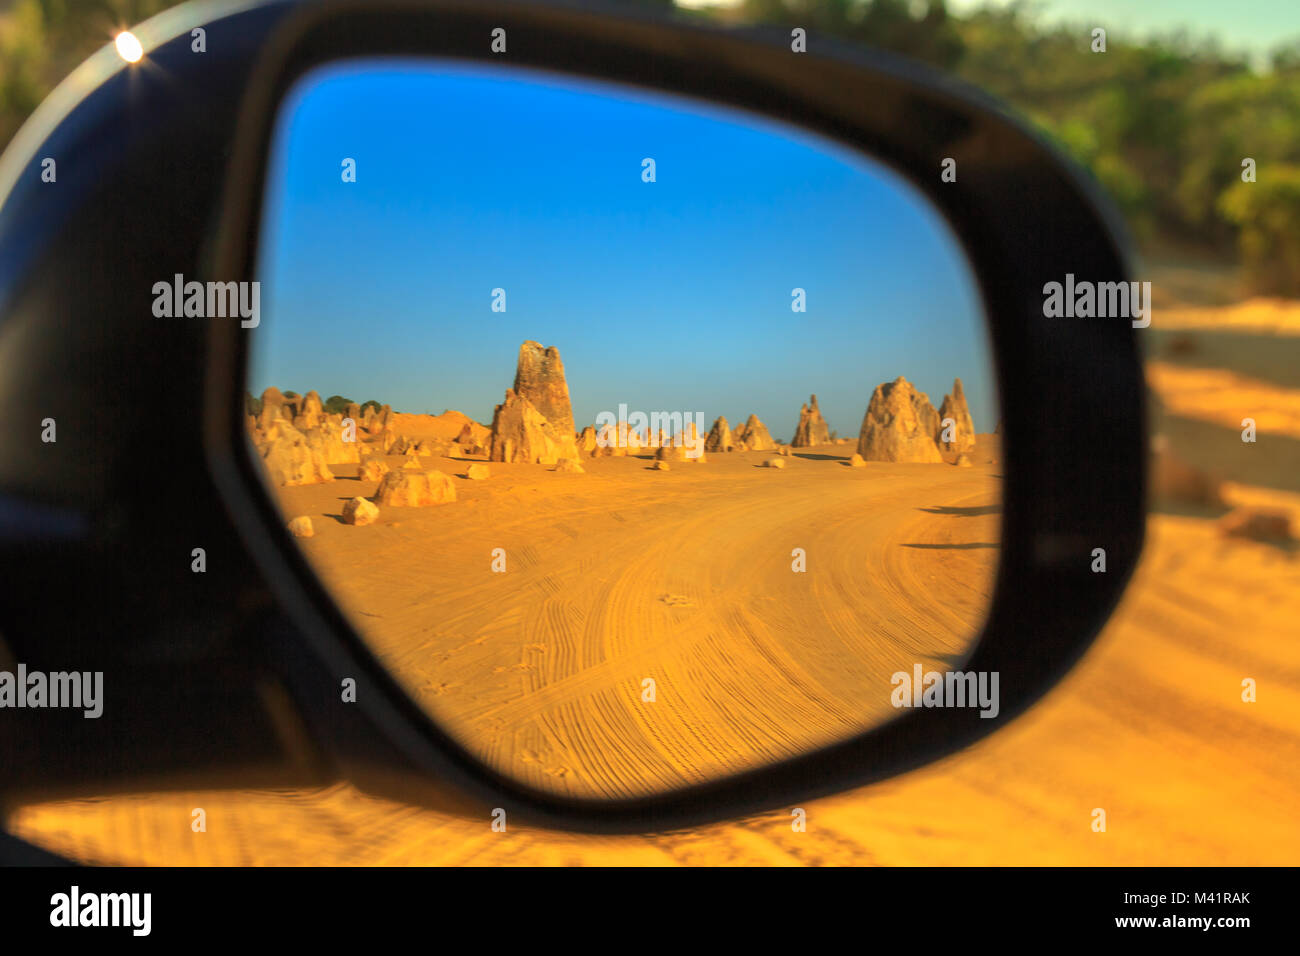 Dirt road of Pinnacles Desert Drive reflecting in the rearview mirror of a tourist car, Nambung National Park, Western Australia. Discovery and adventure tourism concept. Stock Photo